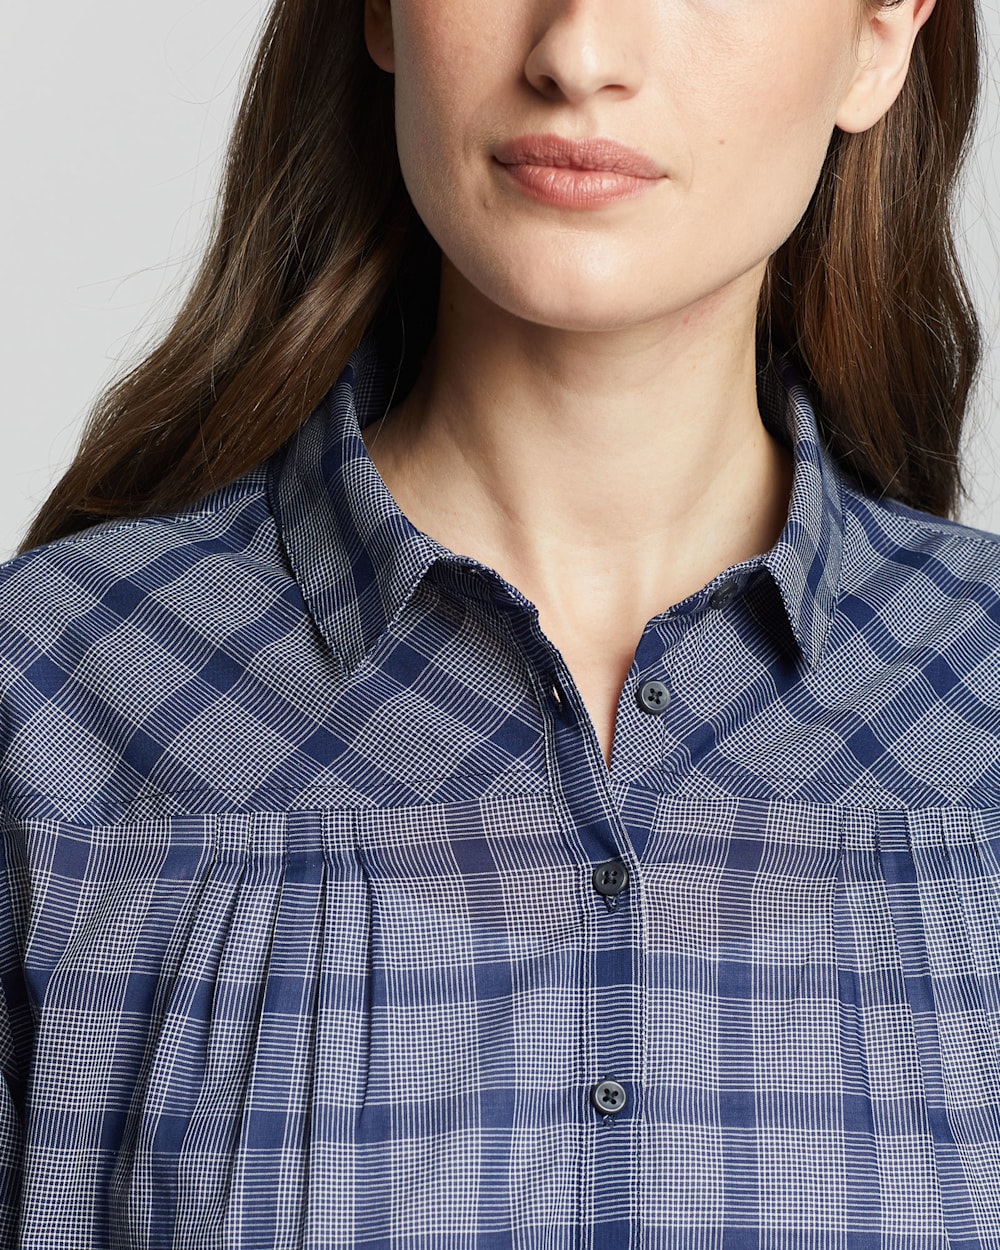 ALTERNATE VIEW OF WOMEN'S AIRY COTTON SHIRT IN NAVY/WHITE PLAID image number 4